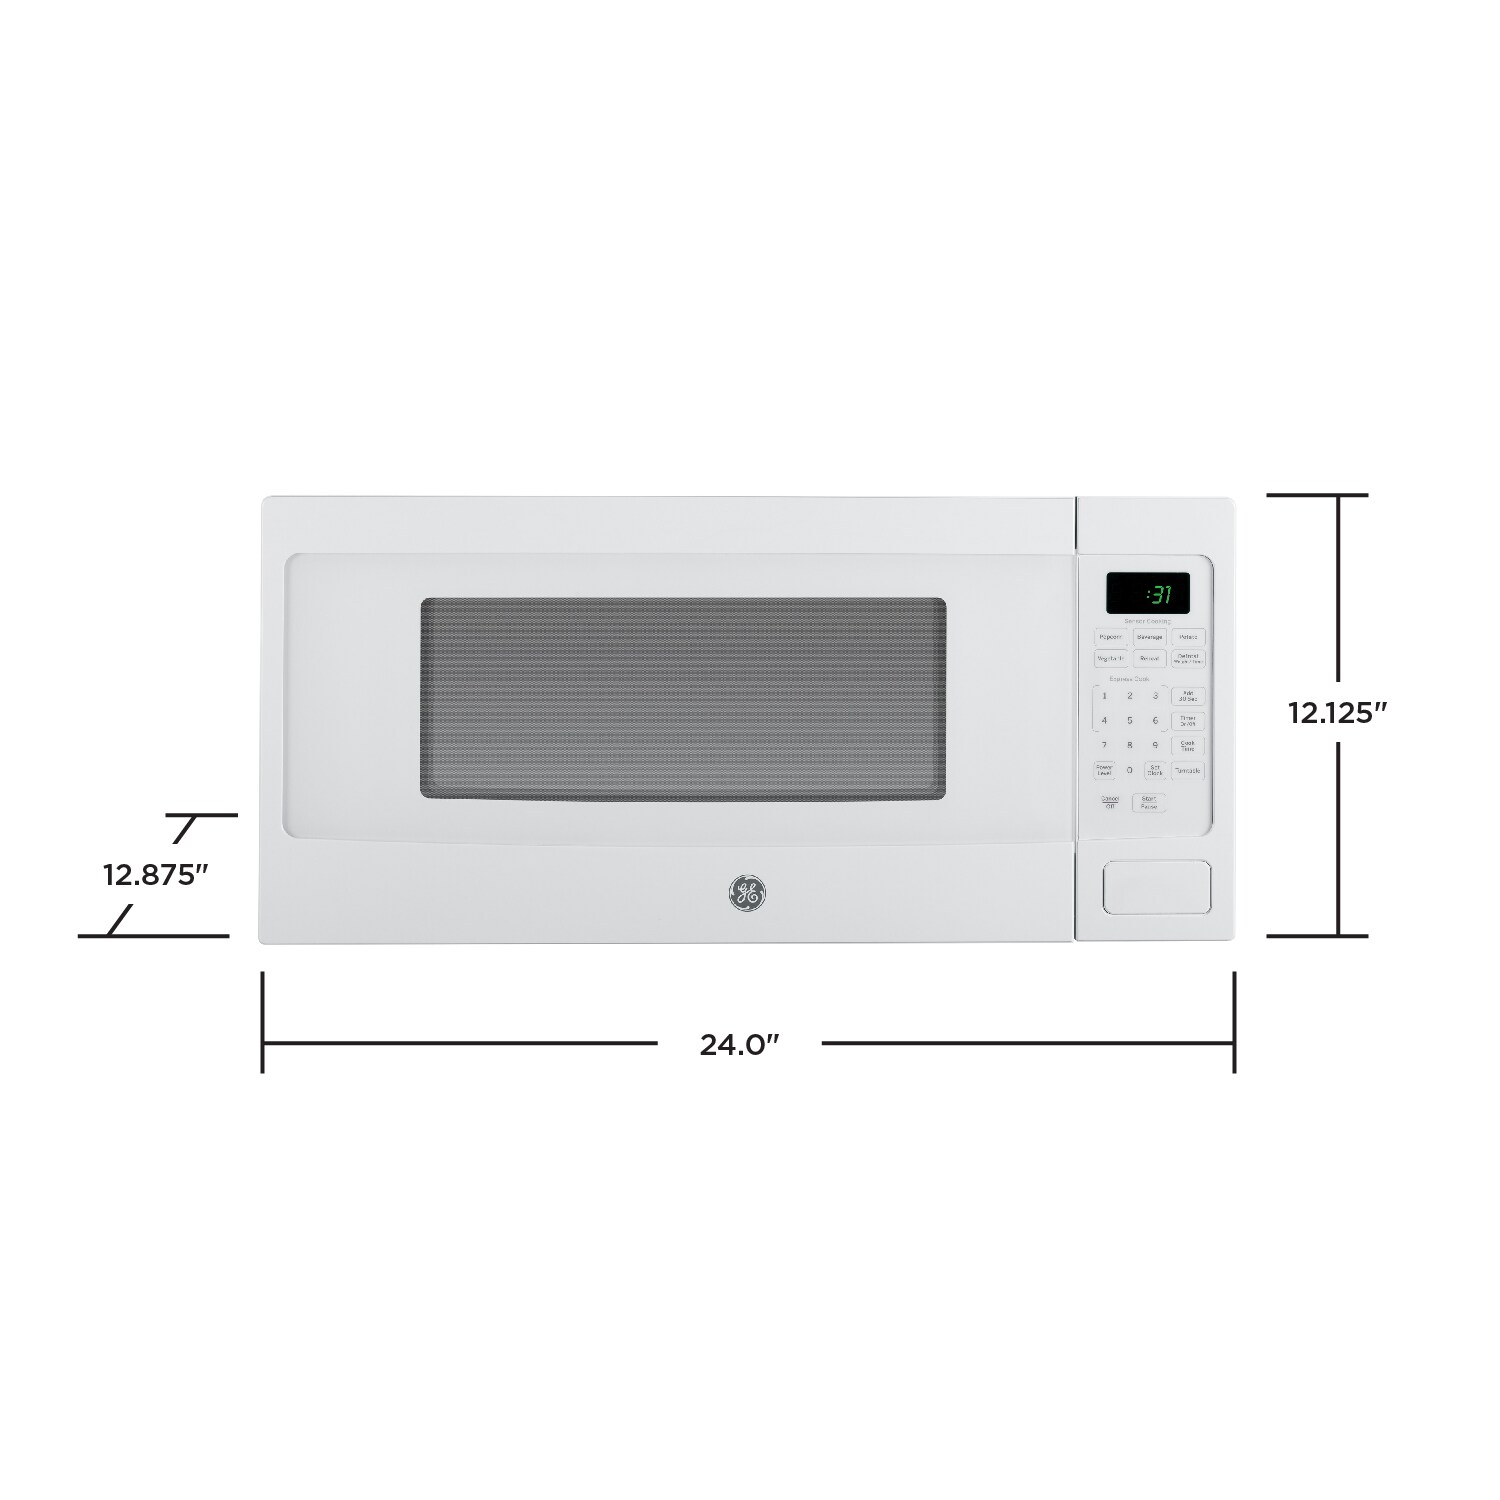 SMALLEST PROFILE Countertop Microwave - 5 star rating! We Love This! REVIEW  